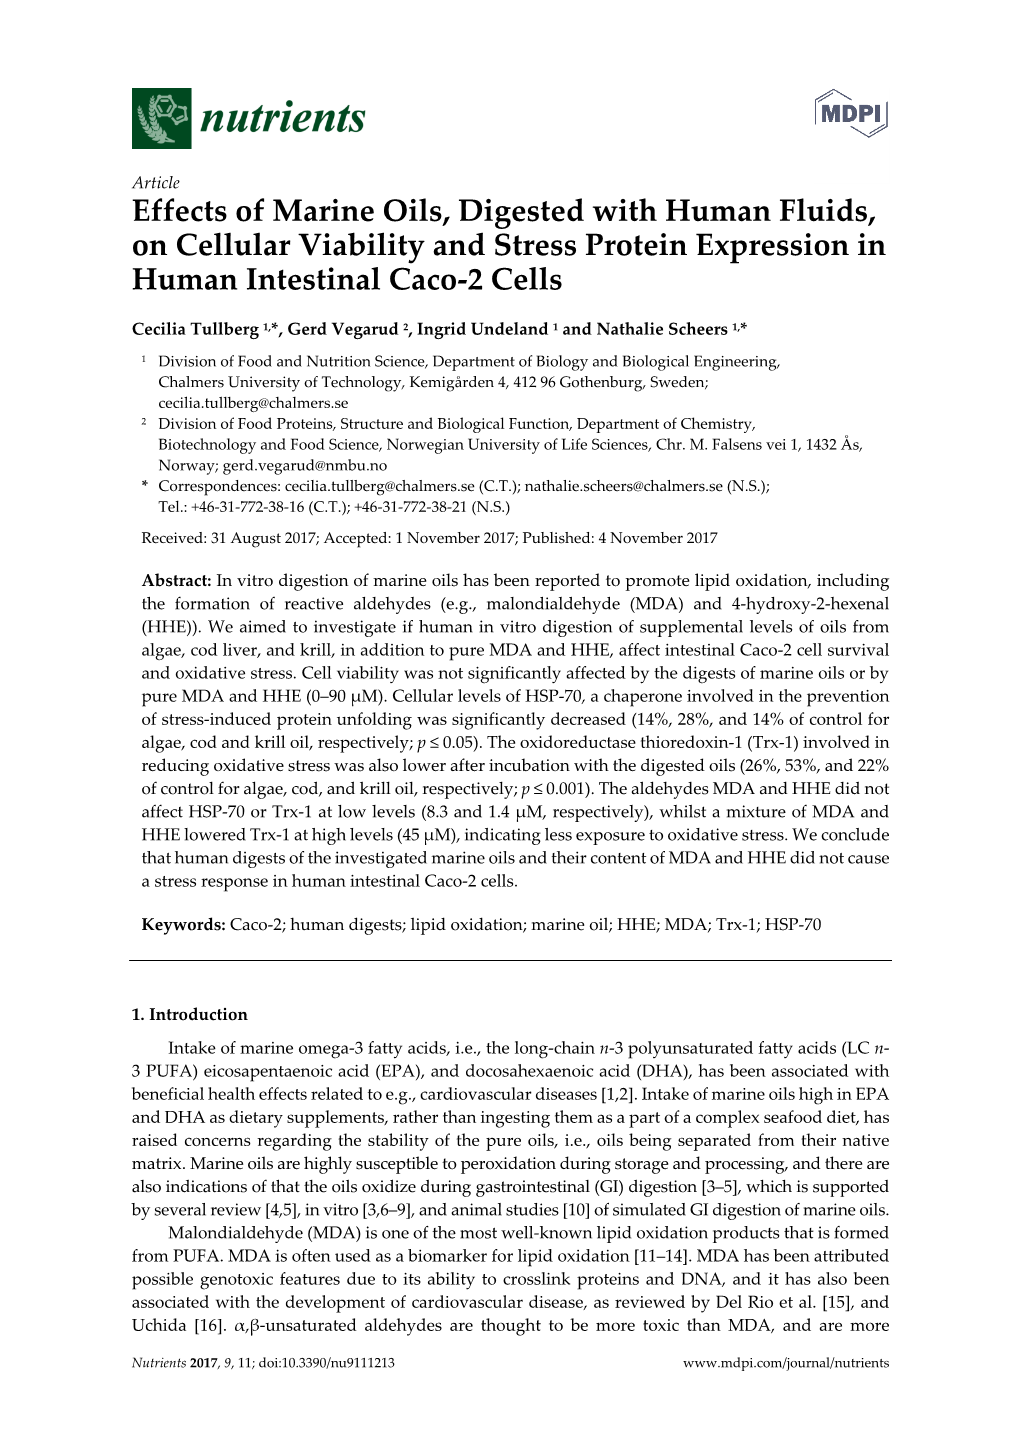 Article Effects of Marine Oils, Digested with Human Fluids, on Cellular Viability and Stress Protein Expression in Human Intestinal Caco-2 Cells